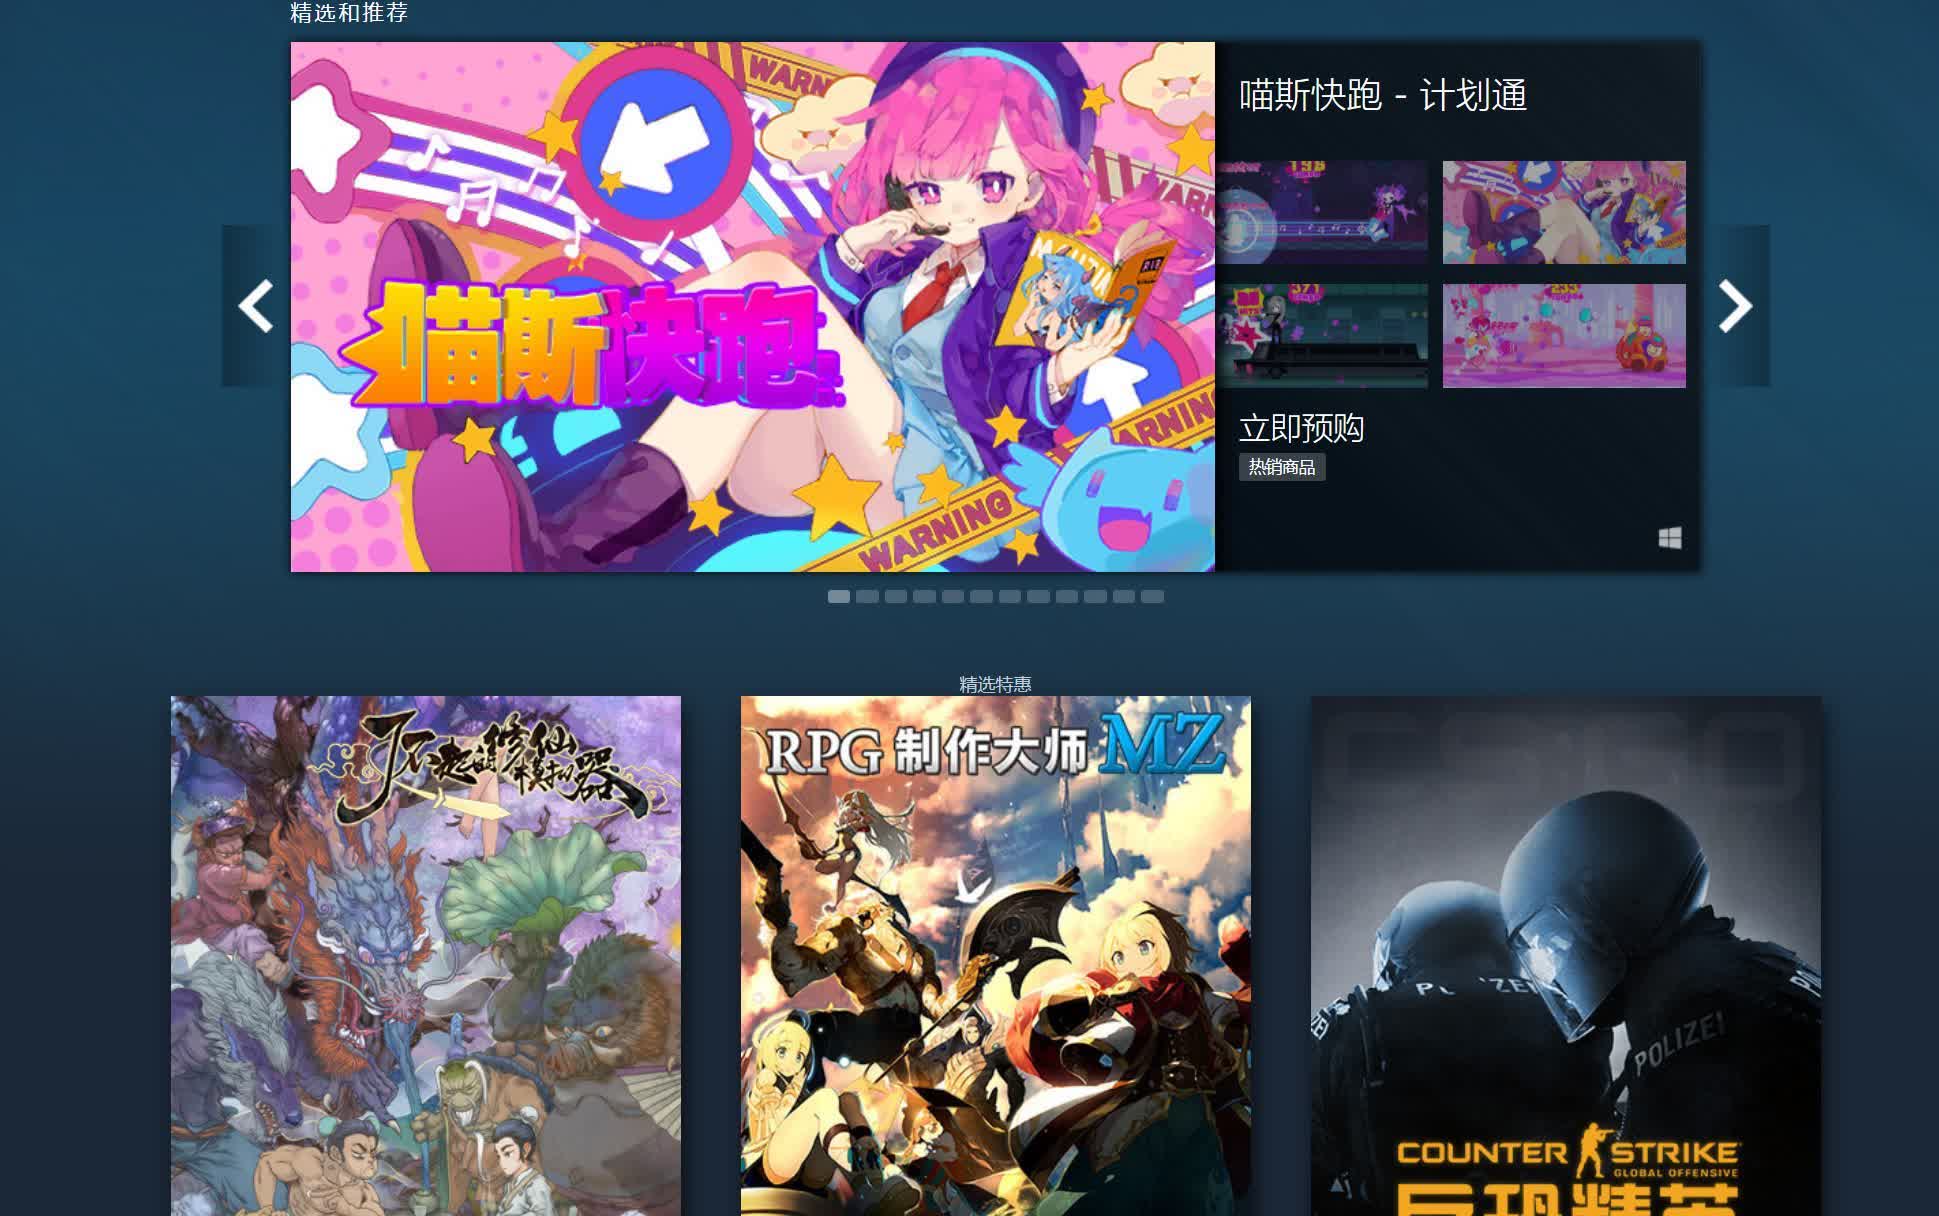 Steam China launches with just 53 games